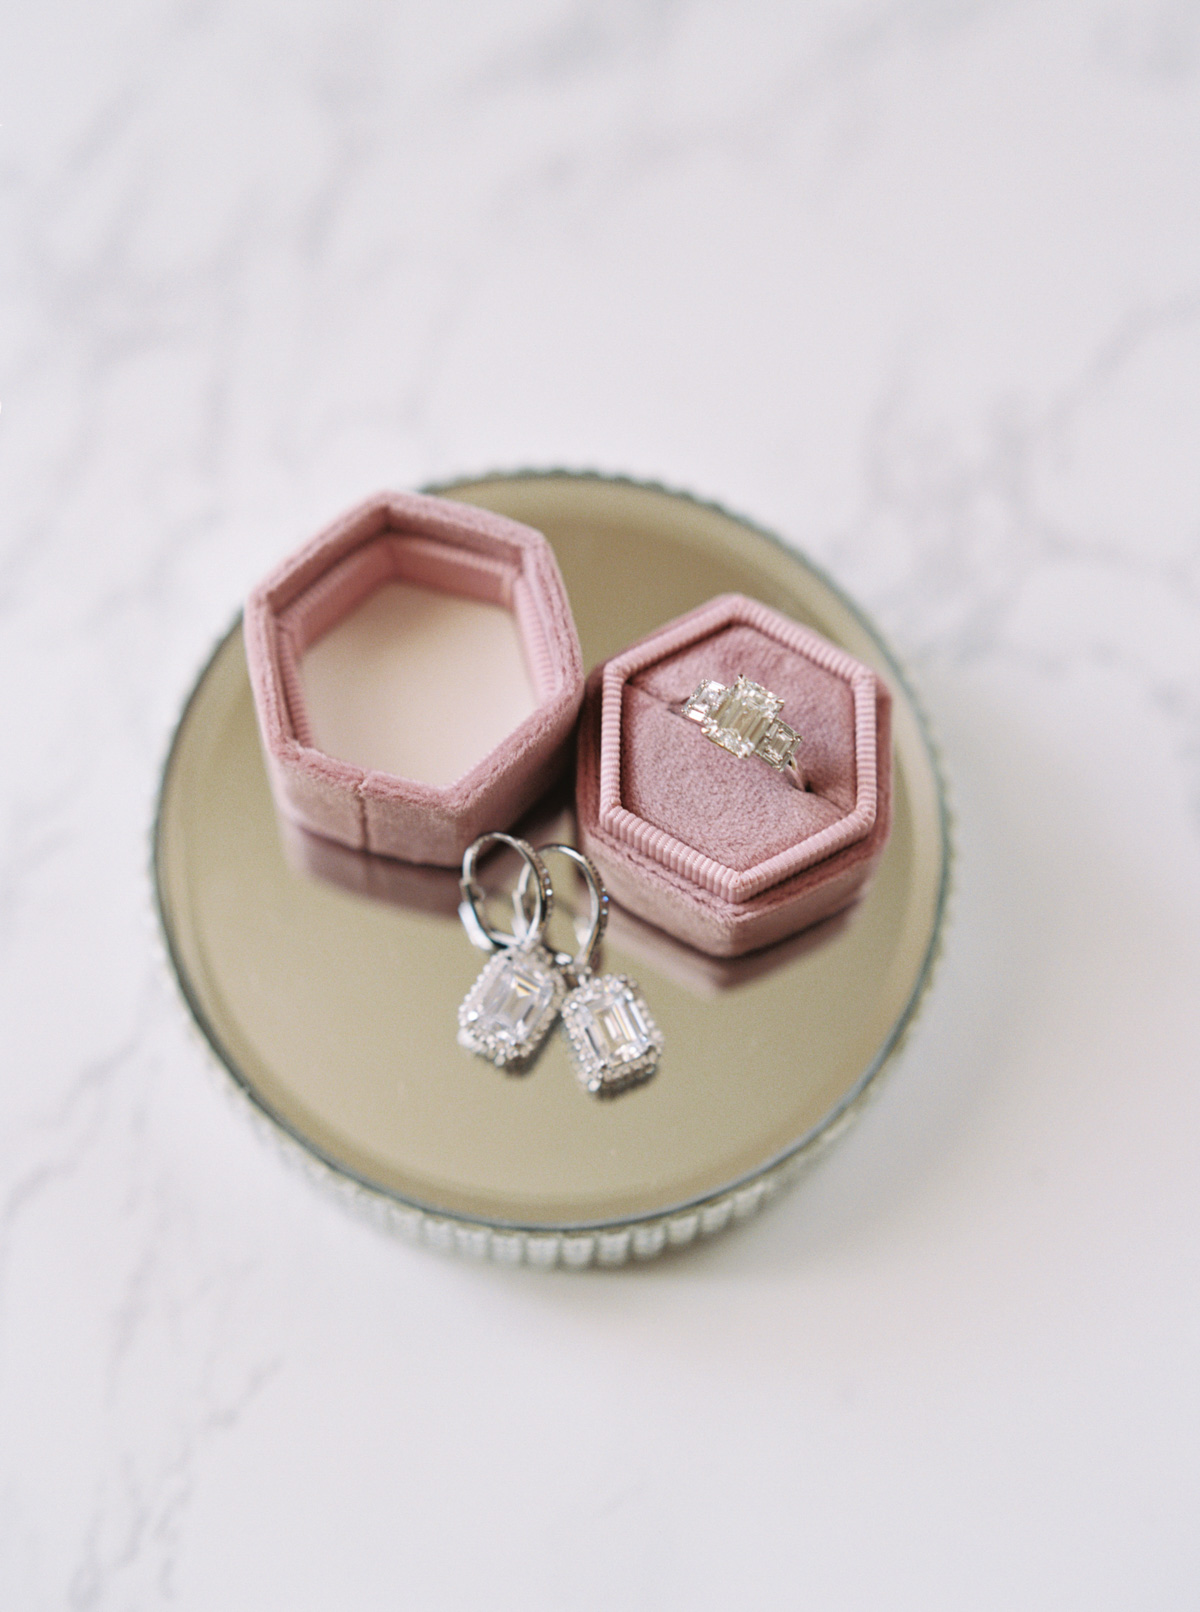 Engagement and wedding rings in bridal suite